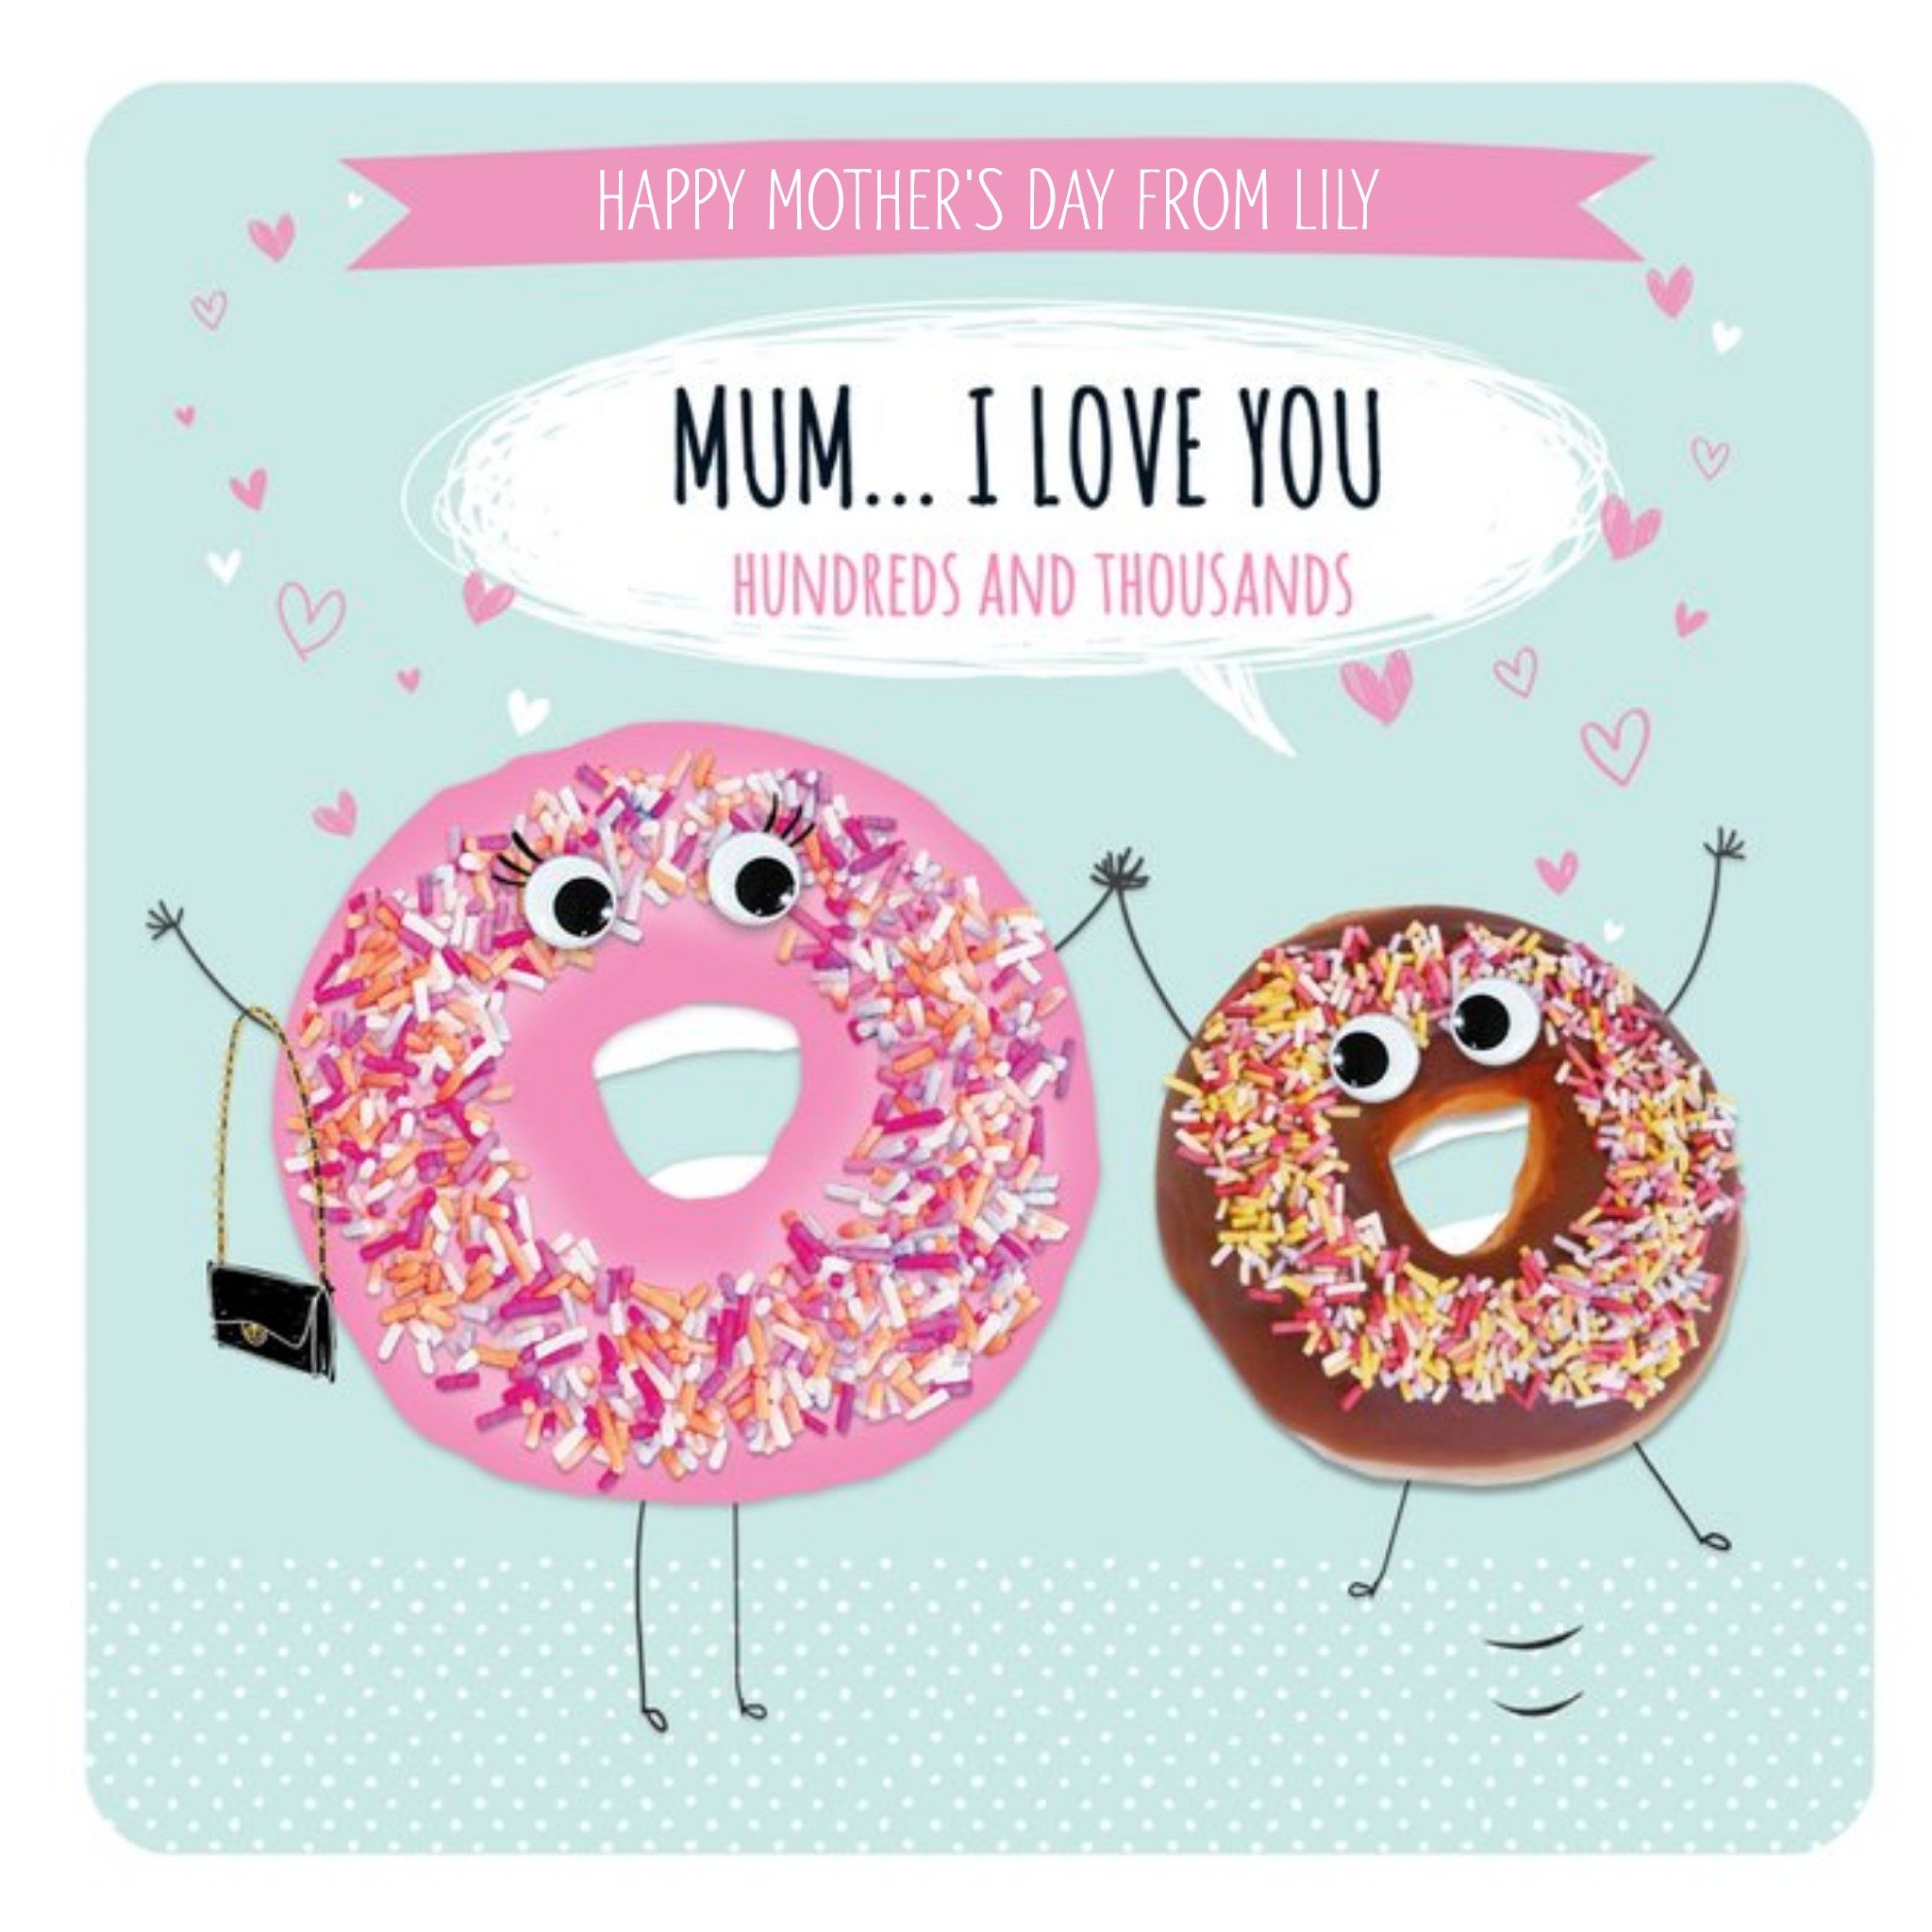 Moonpig Sprinkled Donuts Mum... I Love You Card, Large